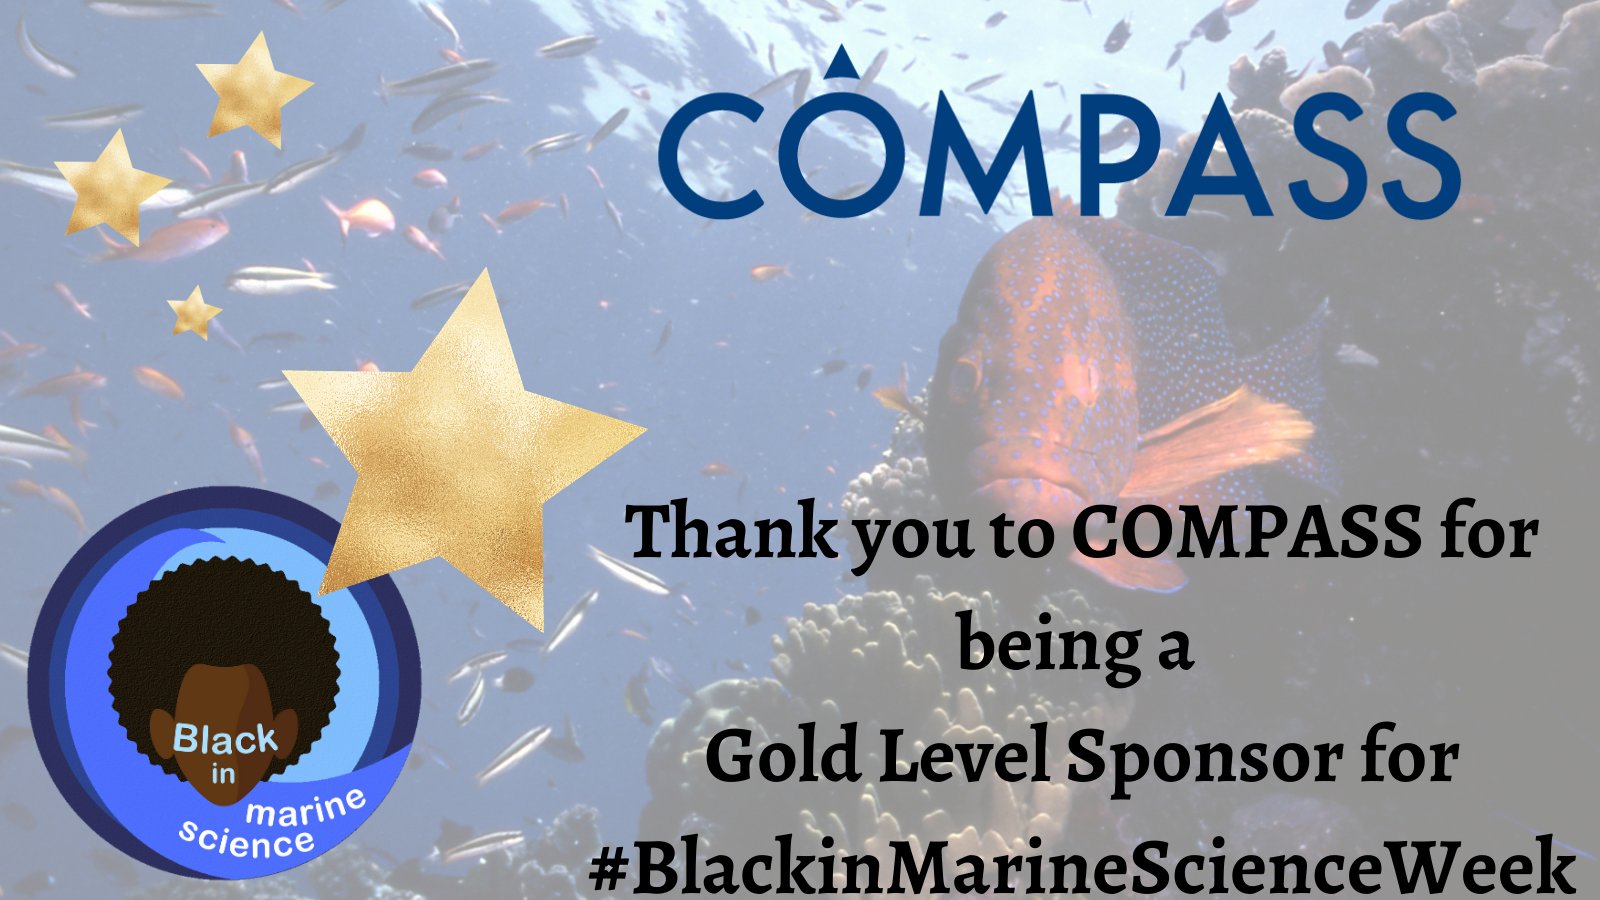 Thank you to COMPASS for being a Gold Level Sponsor for Black in Marine Science Week